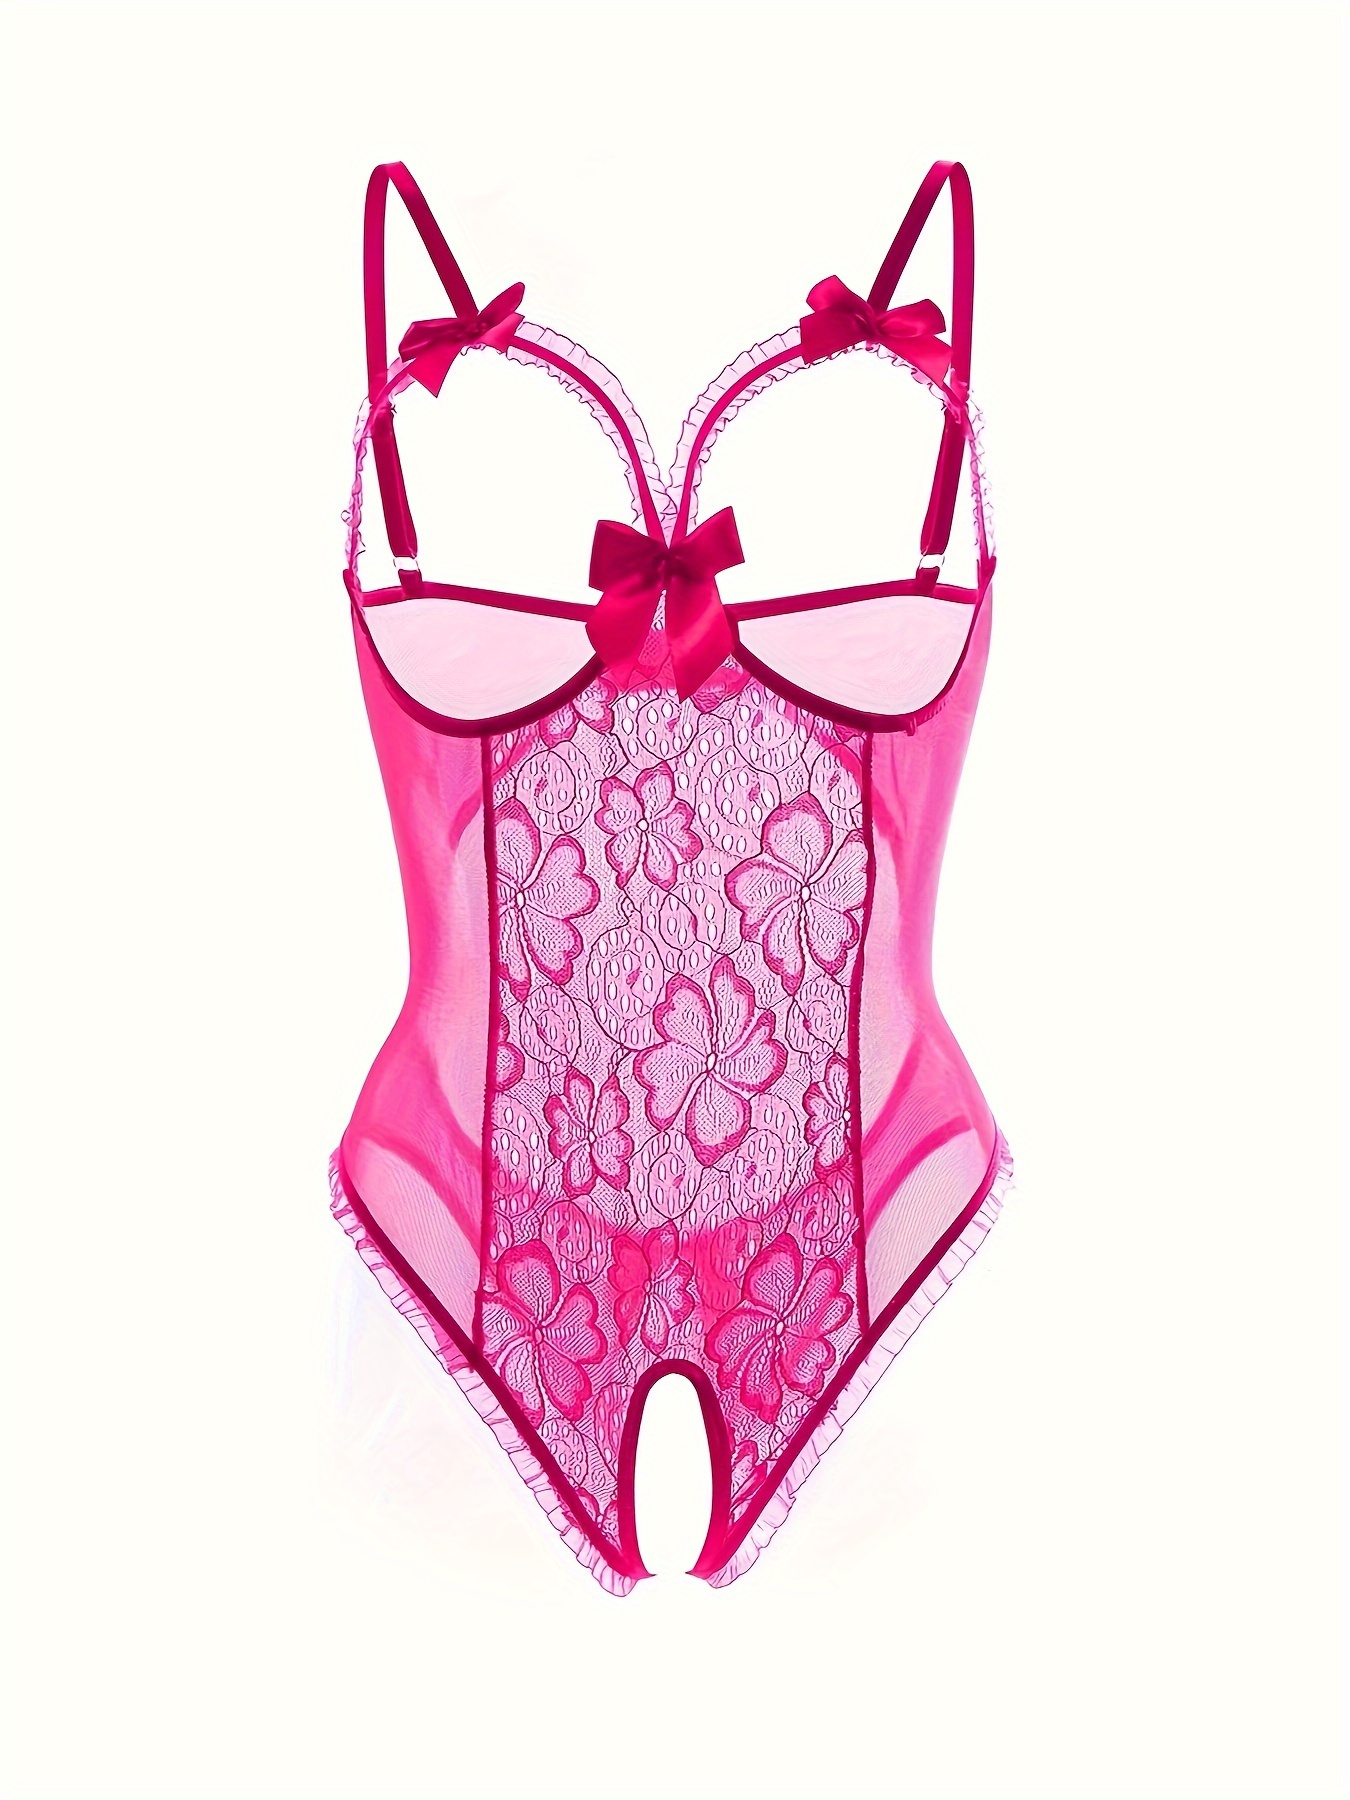  Teddy Lingerie For Women,Front Double Strap Floral